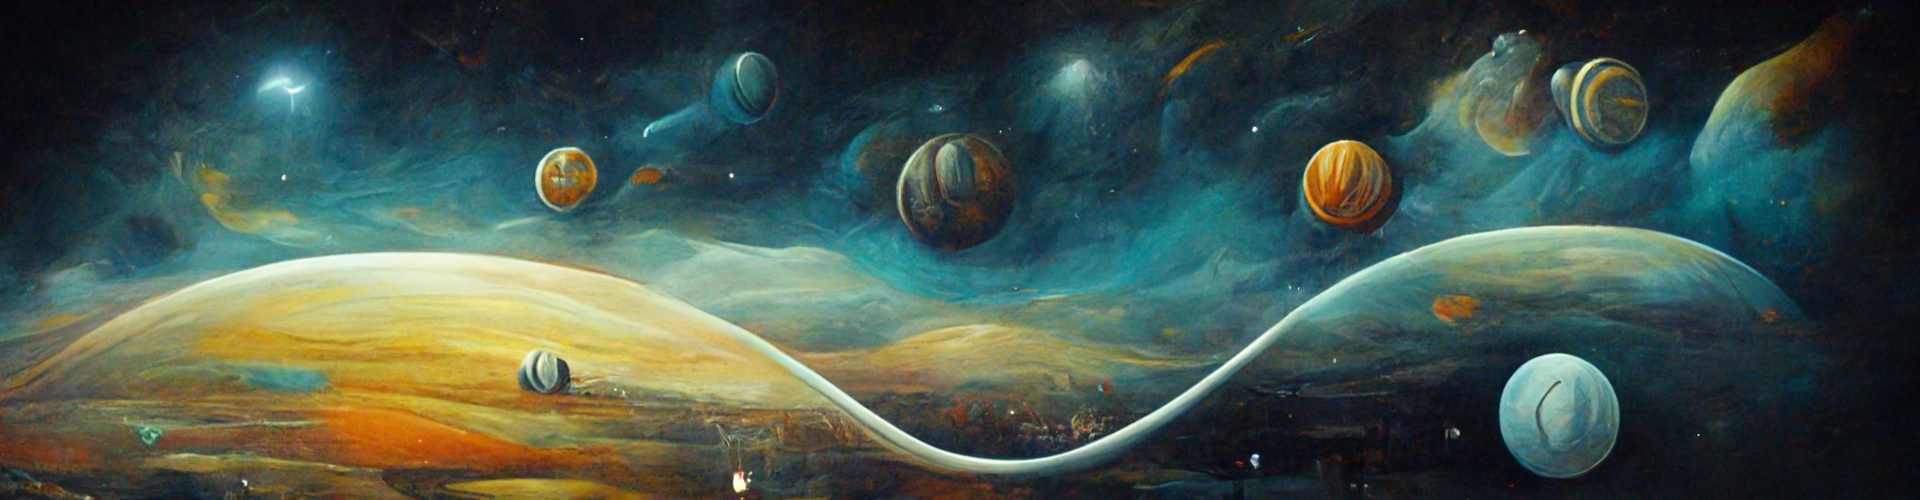 wall mural of stylistic painting of the Caelus star system